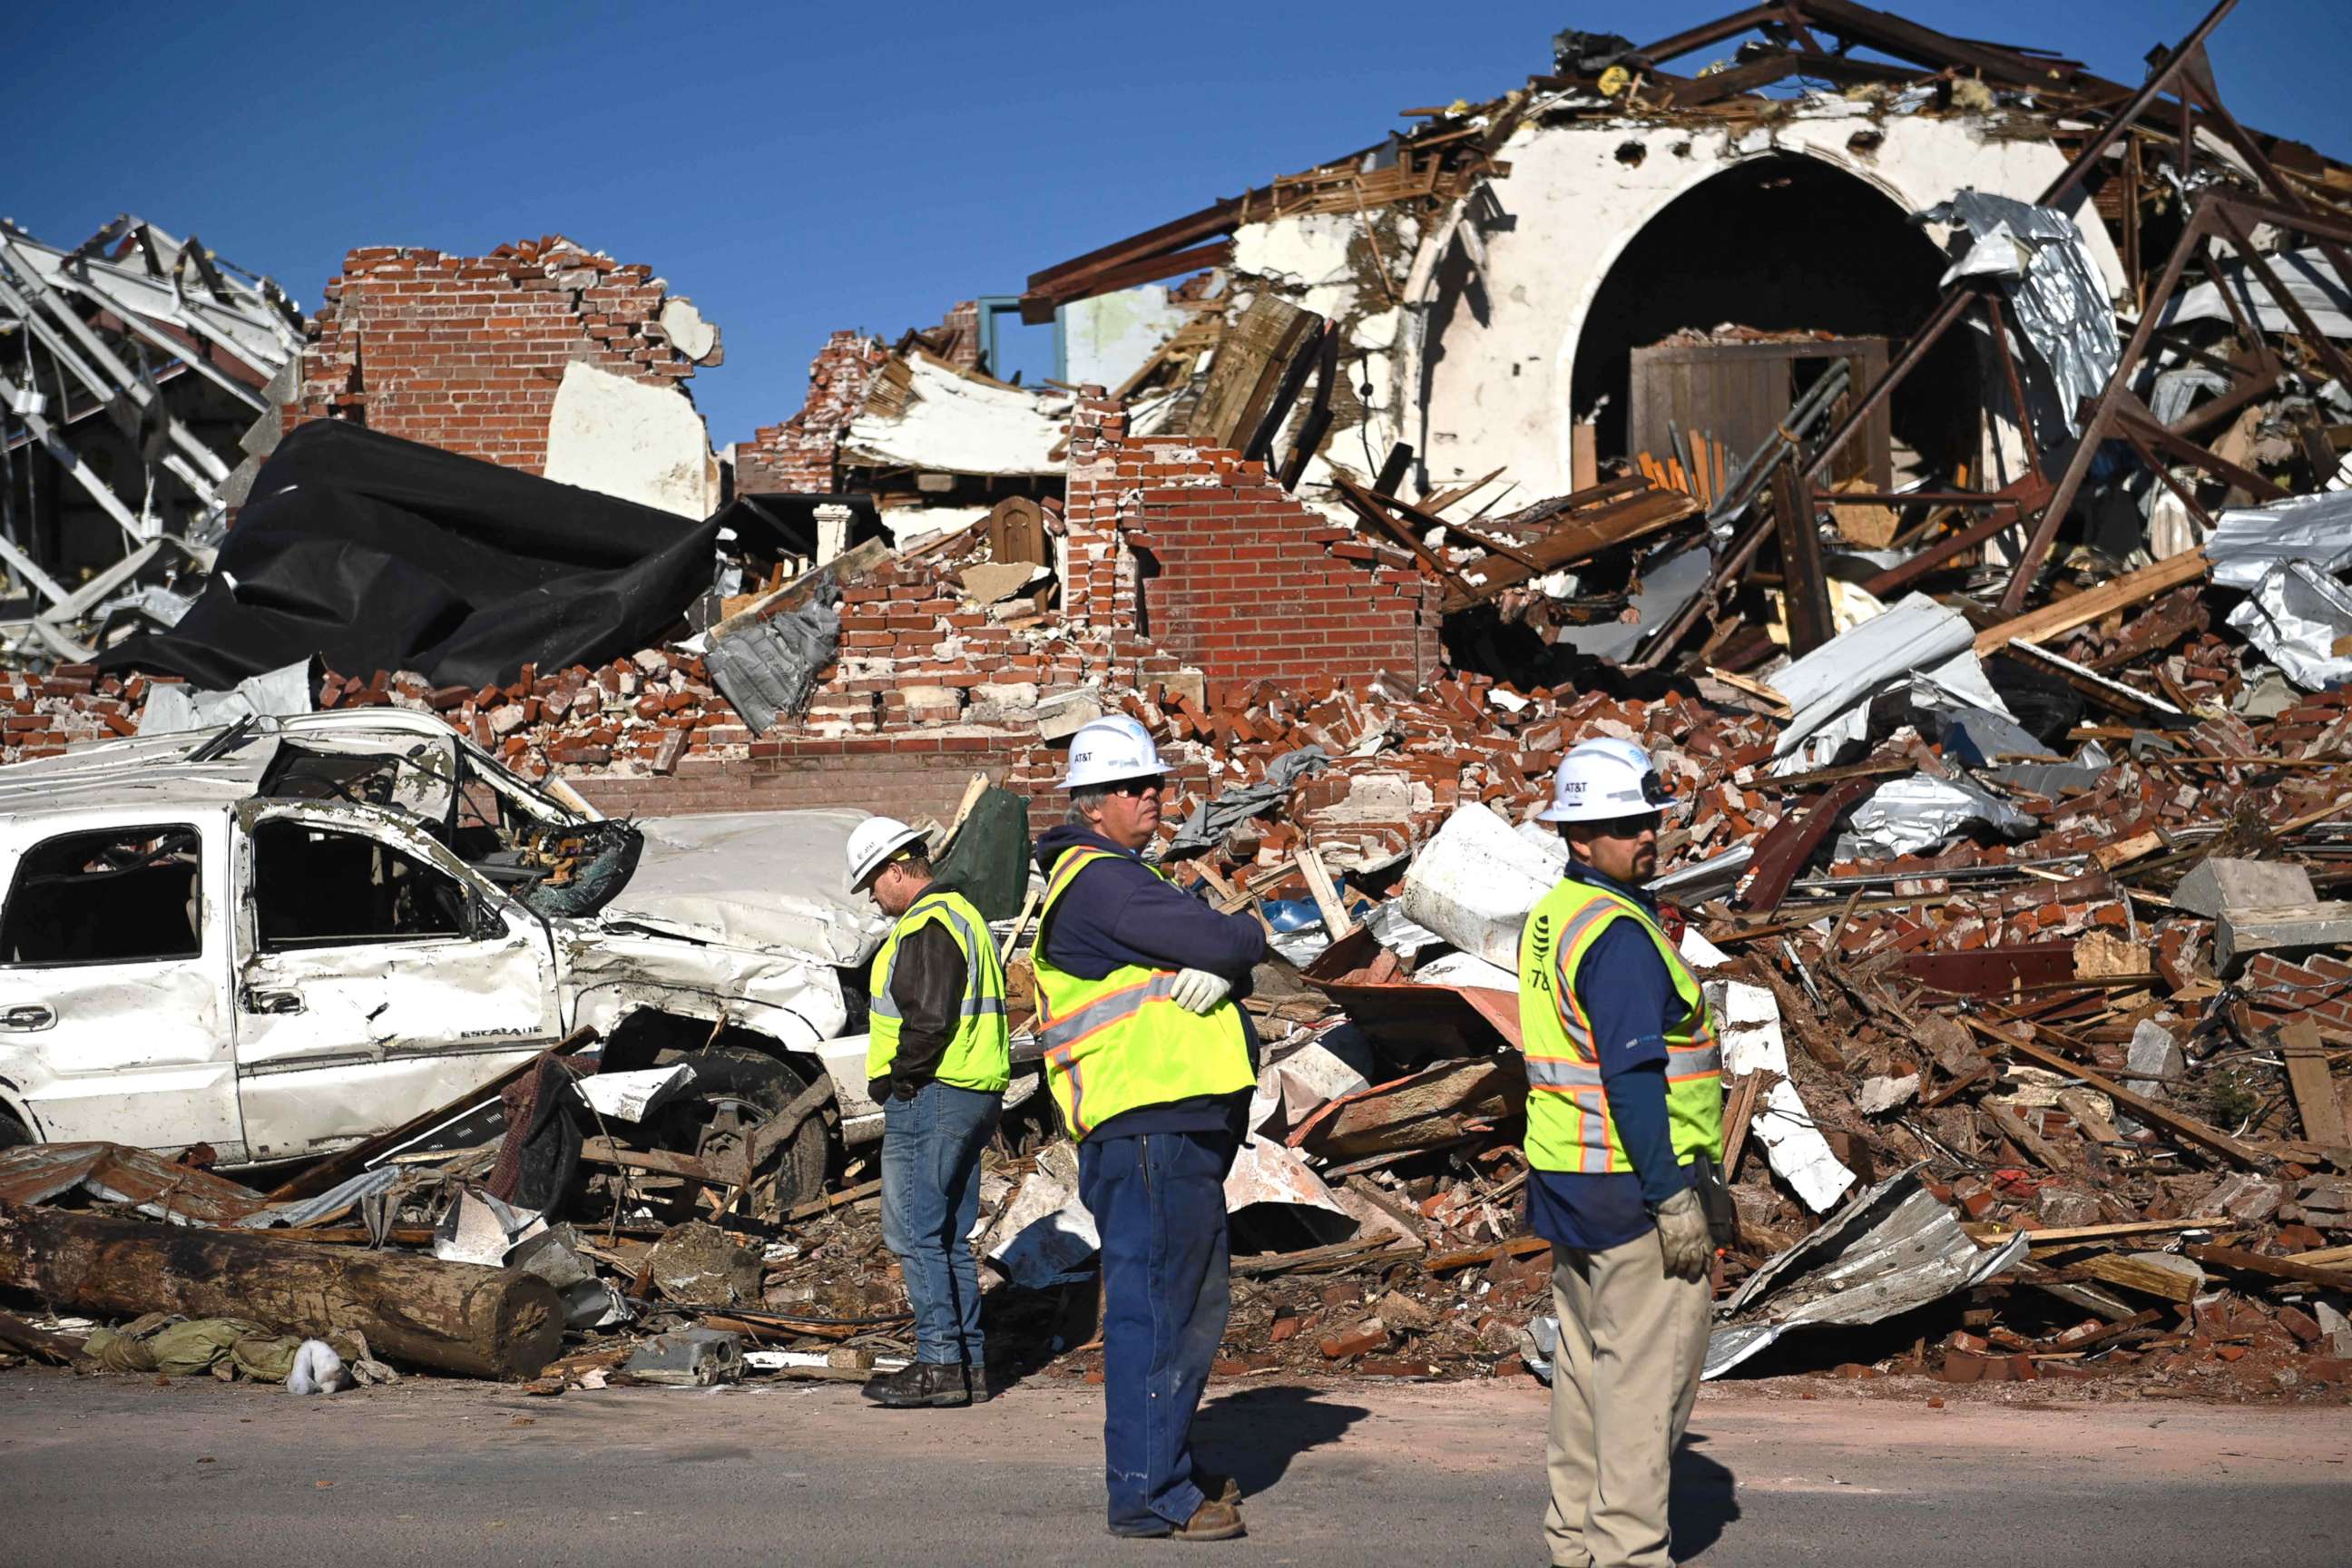 PHOTO: Workers survey tornado damage after extreme weather hit the region Dec. 12, 2021, in Mayfield, Ky.